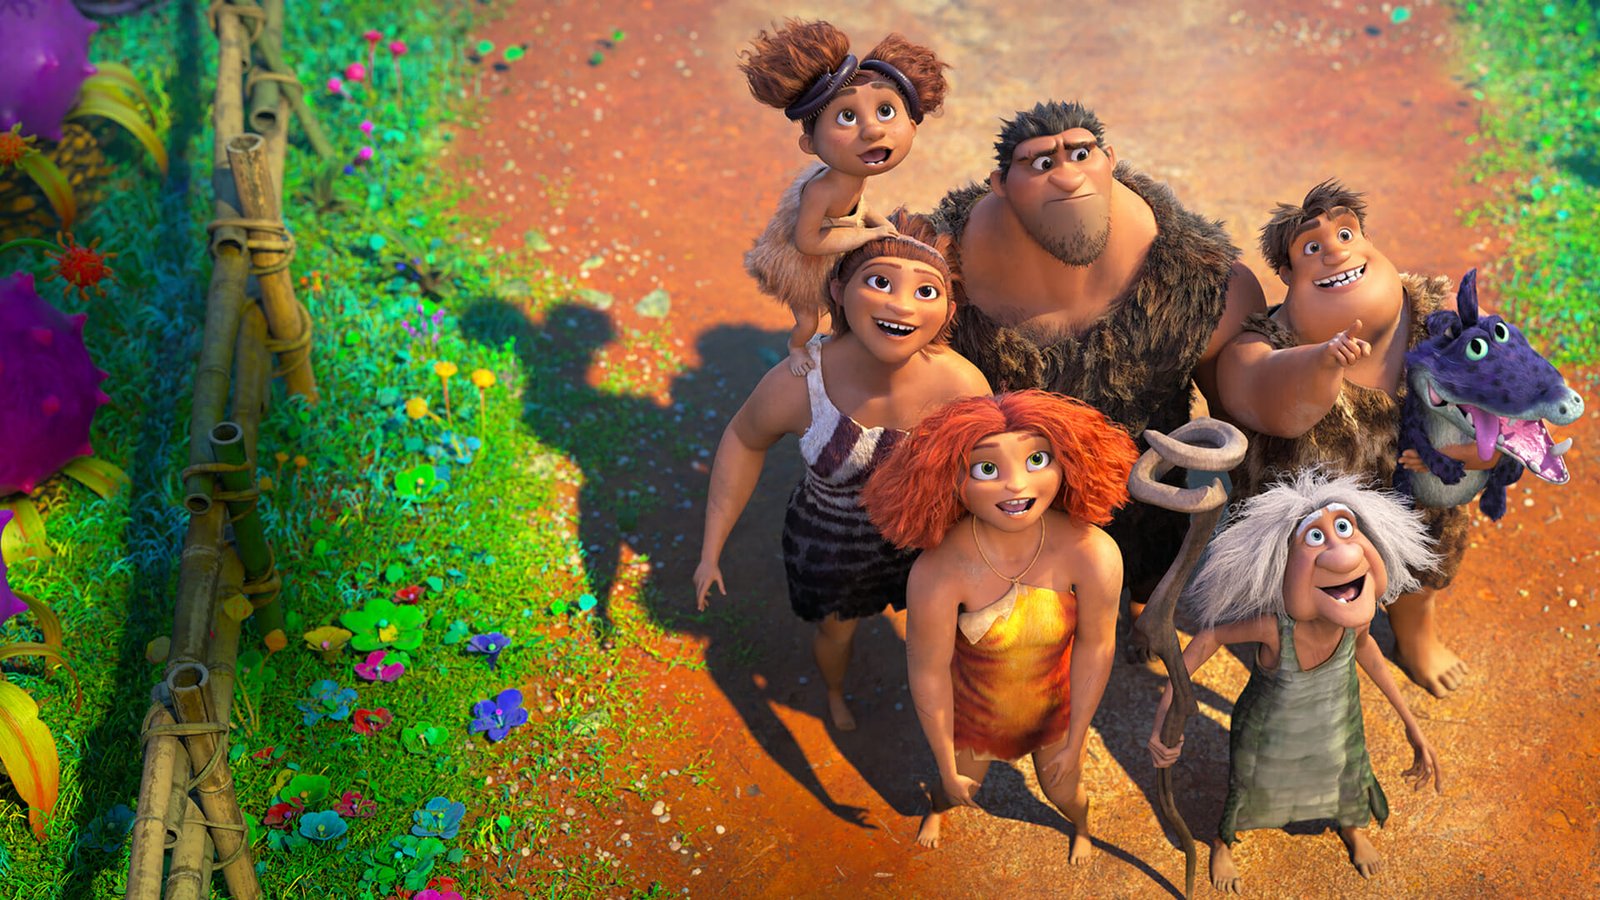 Best movies on Hulu: The Croods: A New Age